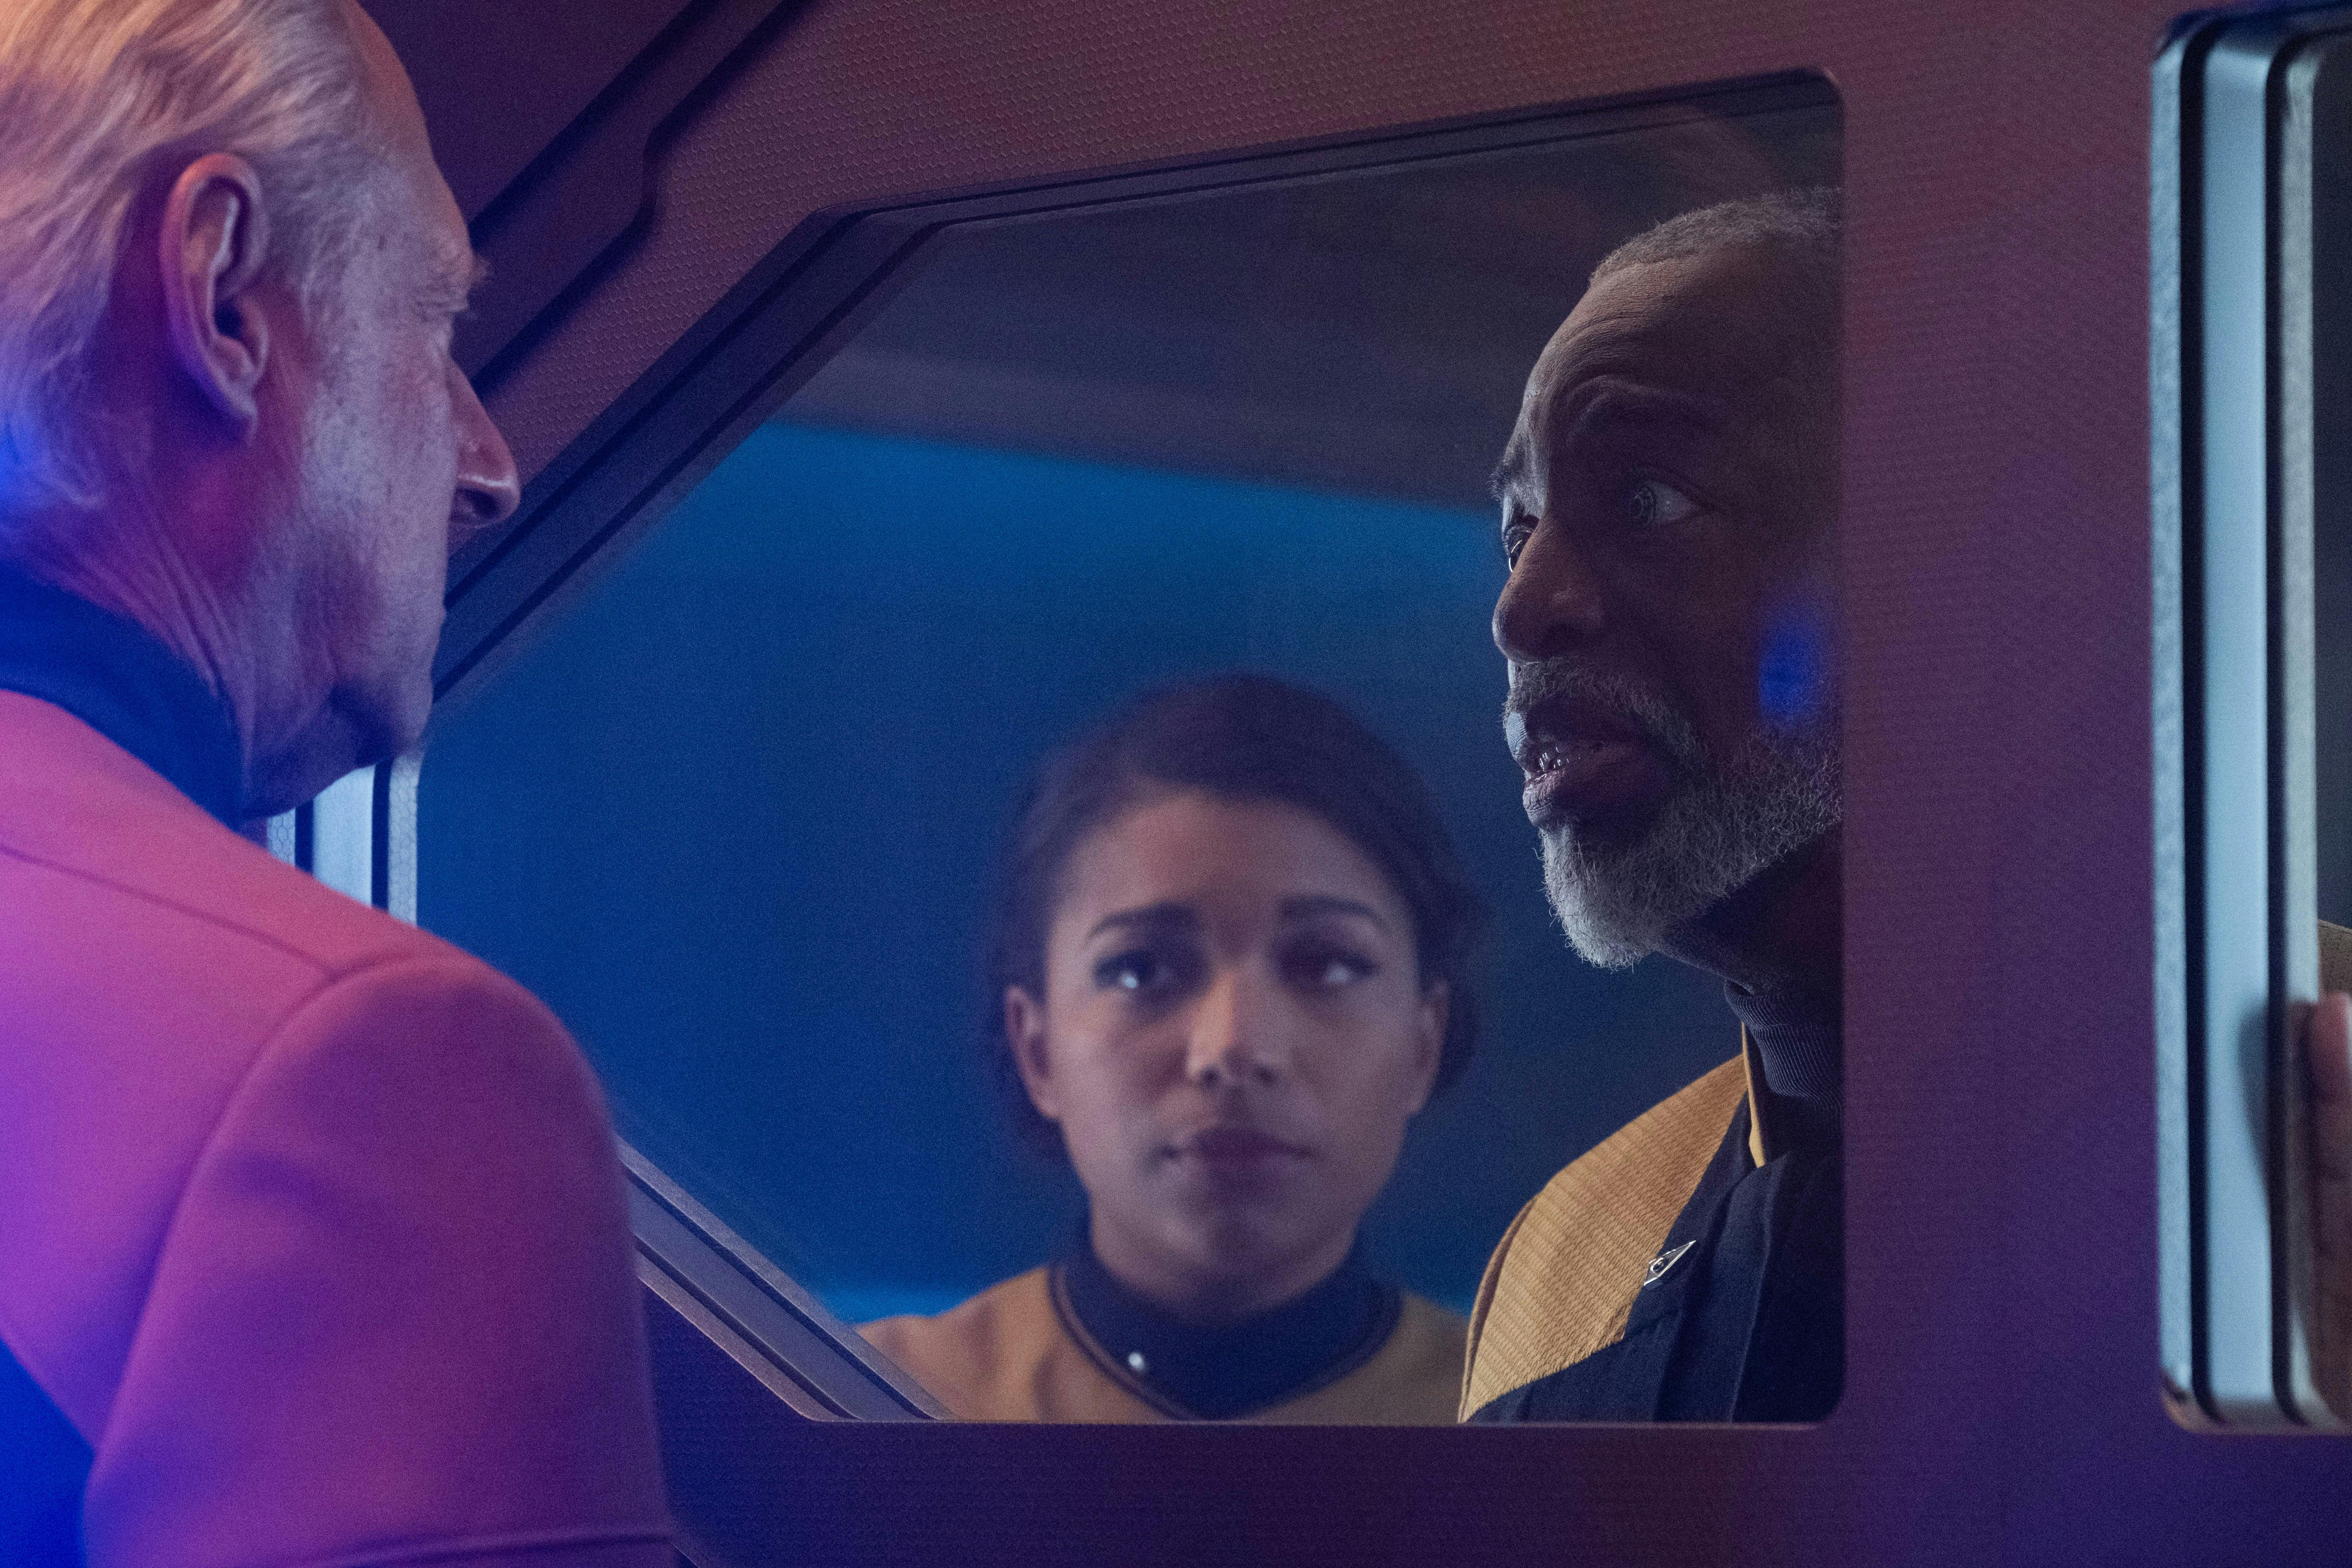 Geordi La Forge looks at Lore behind the Control Room door as a concerned Alandra looks on